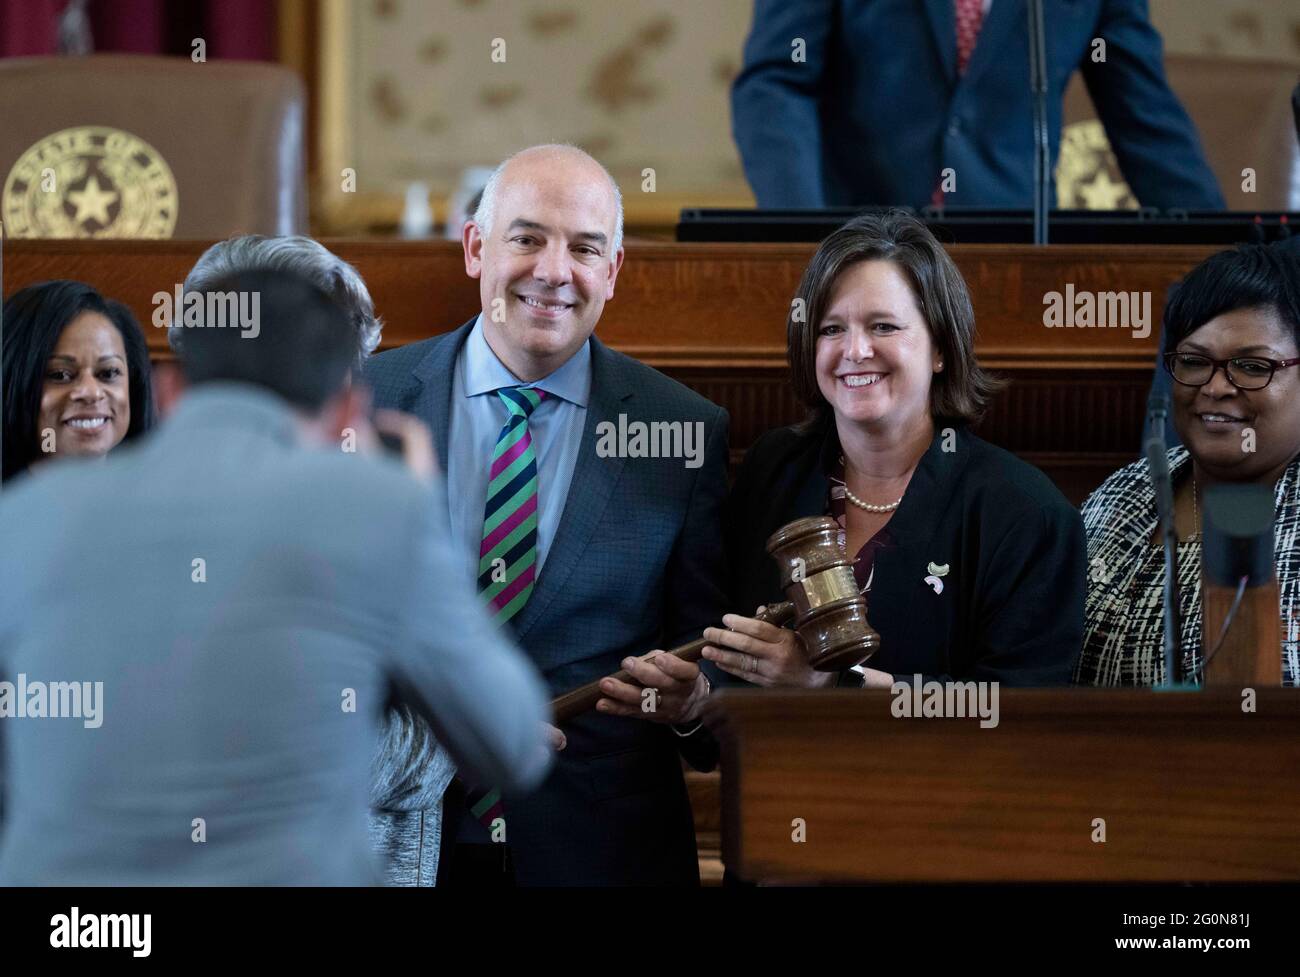 Austin, TX, USA. 30th May, 2021. House Democratic Caucus leader CHRIS TURNER, D-Grand Prairie, poses with Rep. ANN JOHNSON, D-Houston, who received a gavel as the Freshman of the Year on the final day of the 87th Texas Legislature. Credit: Bob Daemmrich/ZUMA Wire/Alamy Live News Stock Photo